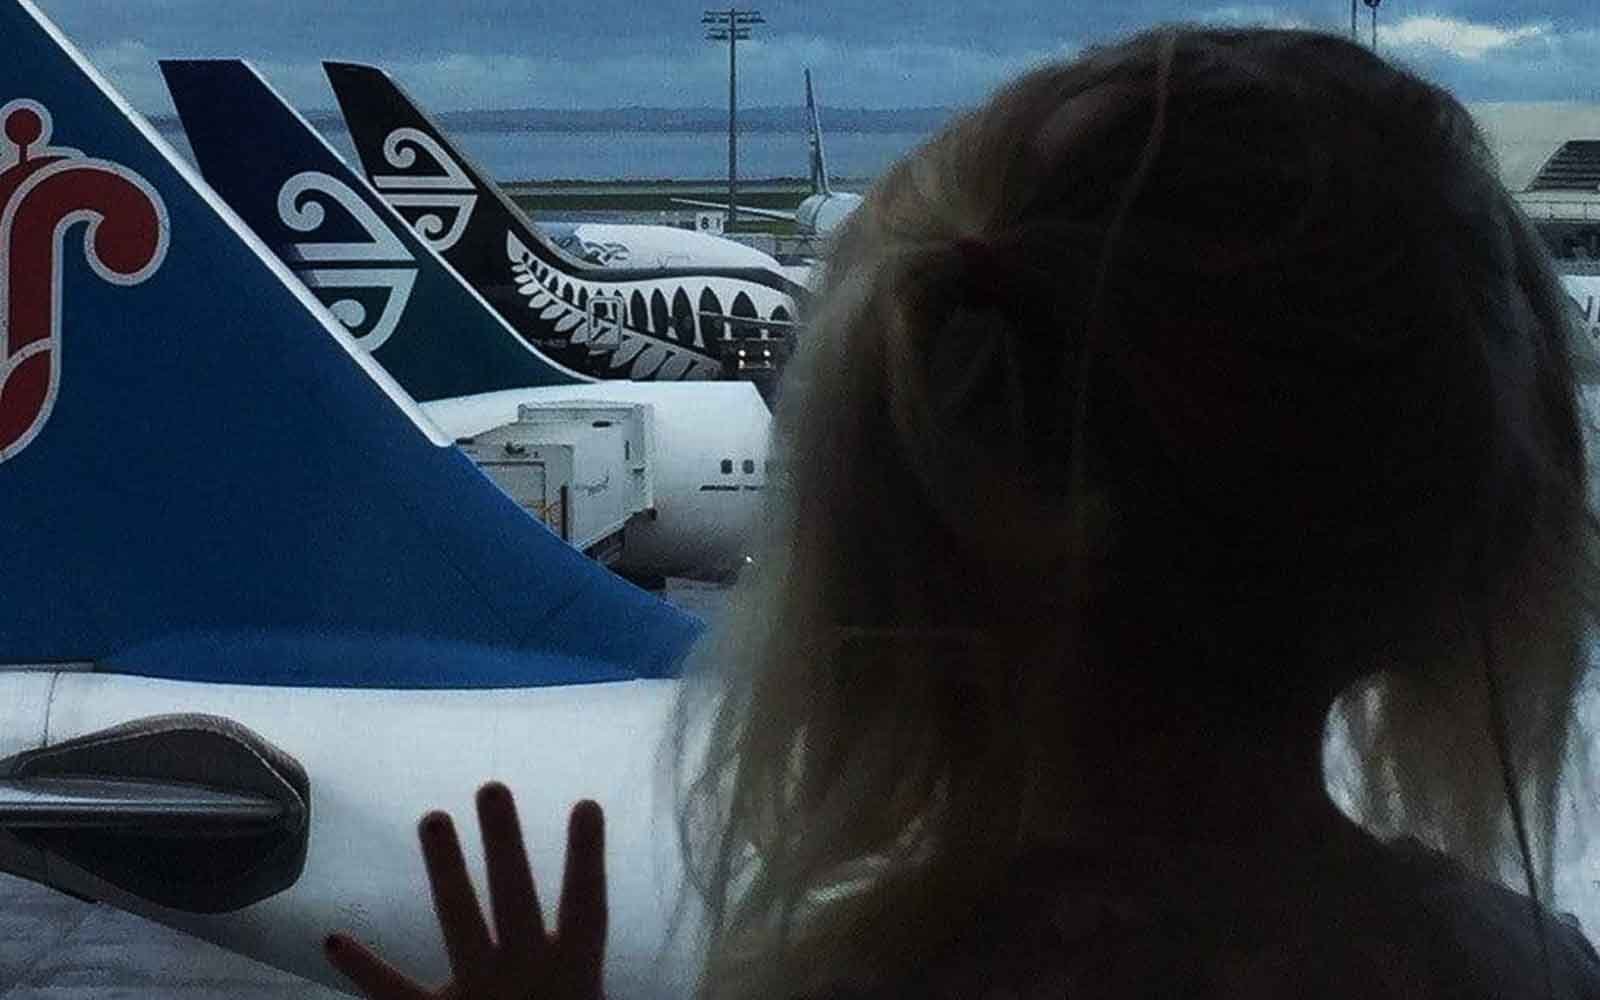 195: Tried-and-True Tips for Travel With Kids